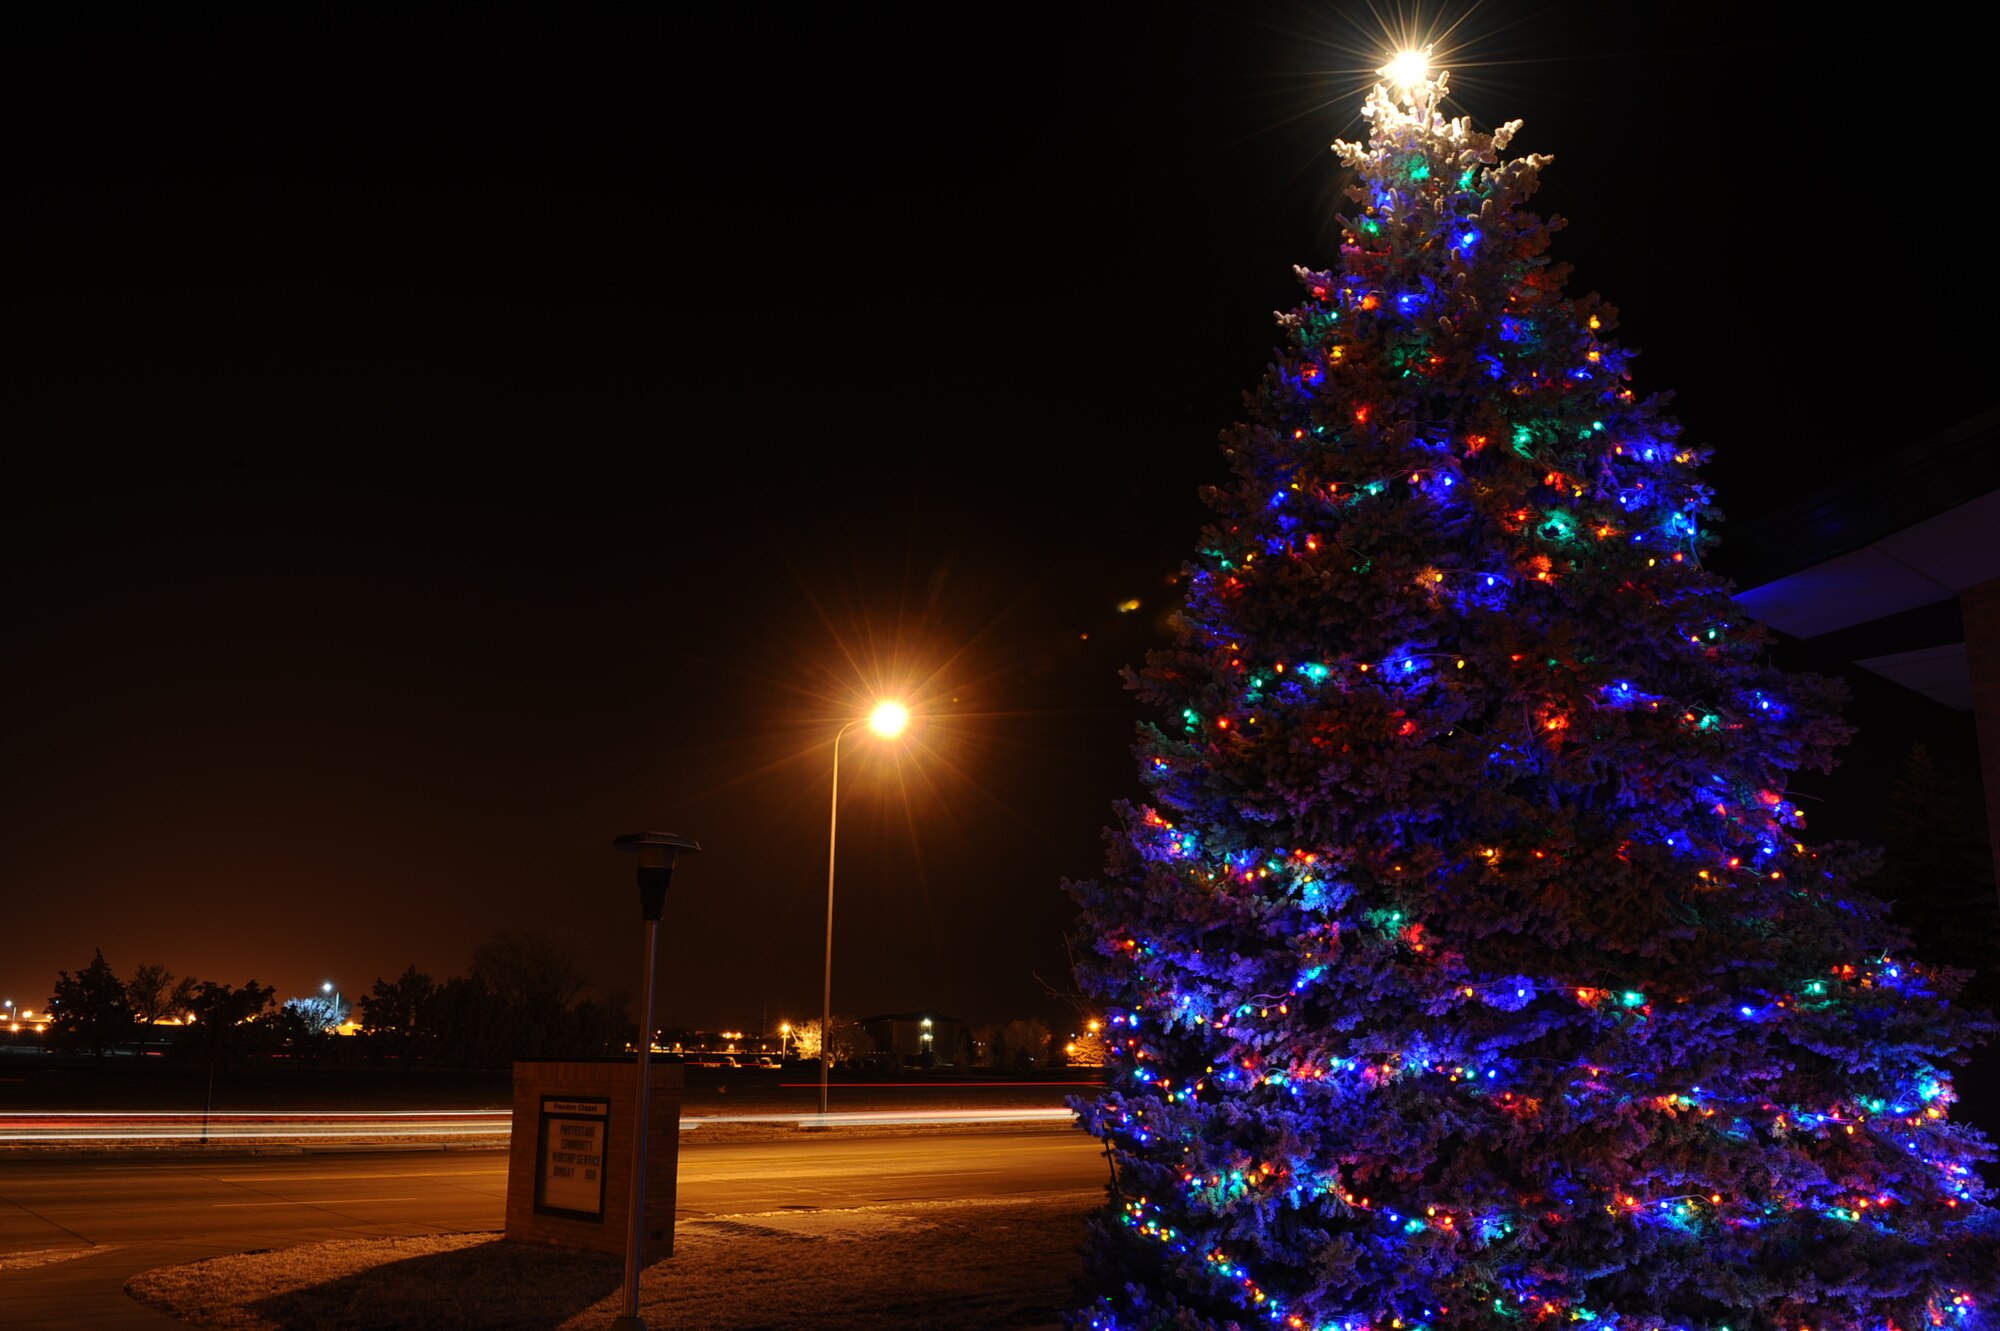 The base Christmas tree shines brightly next to the Freedom Chapel on Ellsworth Air Force Base, S.D., Dec. 13, 2011. The trees lights will shine throughout the holiday season and bring festive cheer to the Ellsworth community. (U.S. Air Force photo by Airman 1st Class Zachary Hada/Released)